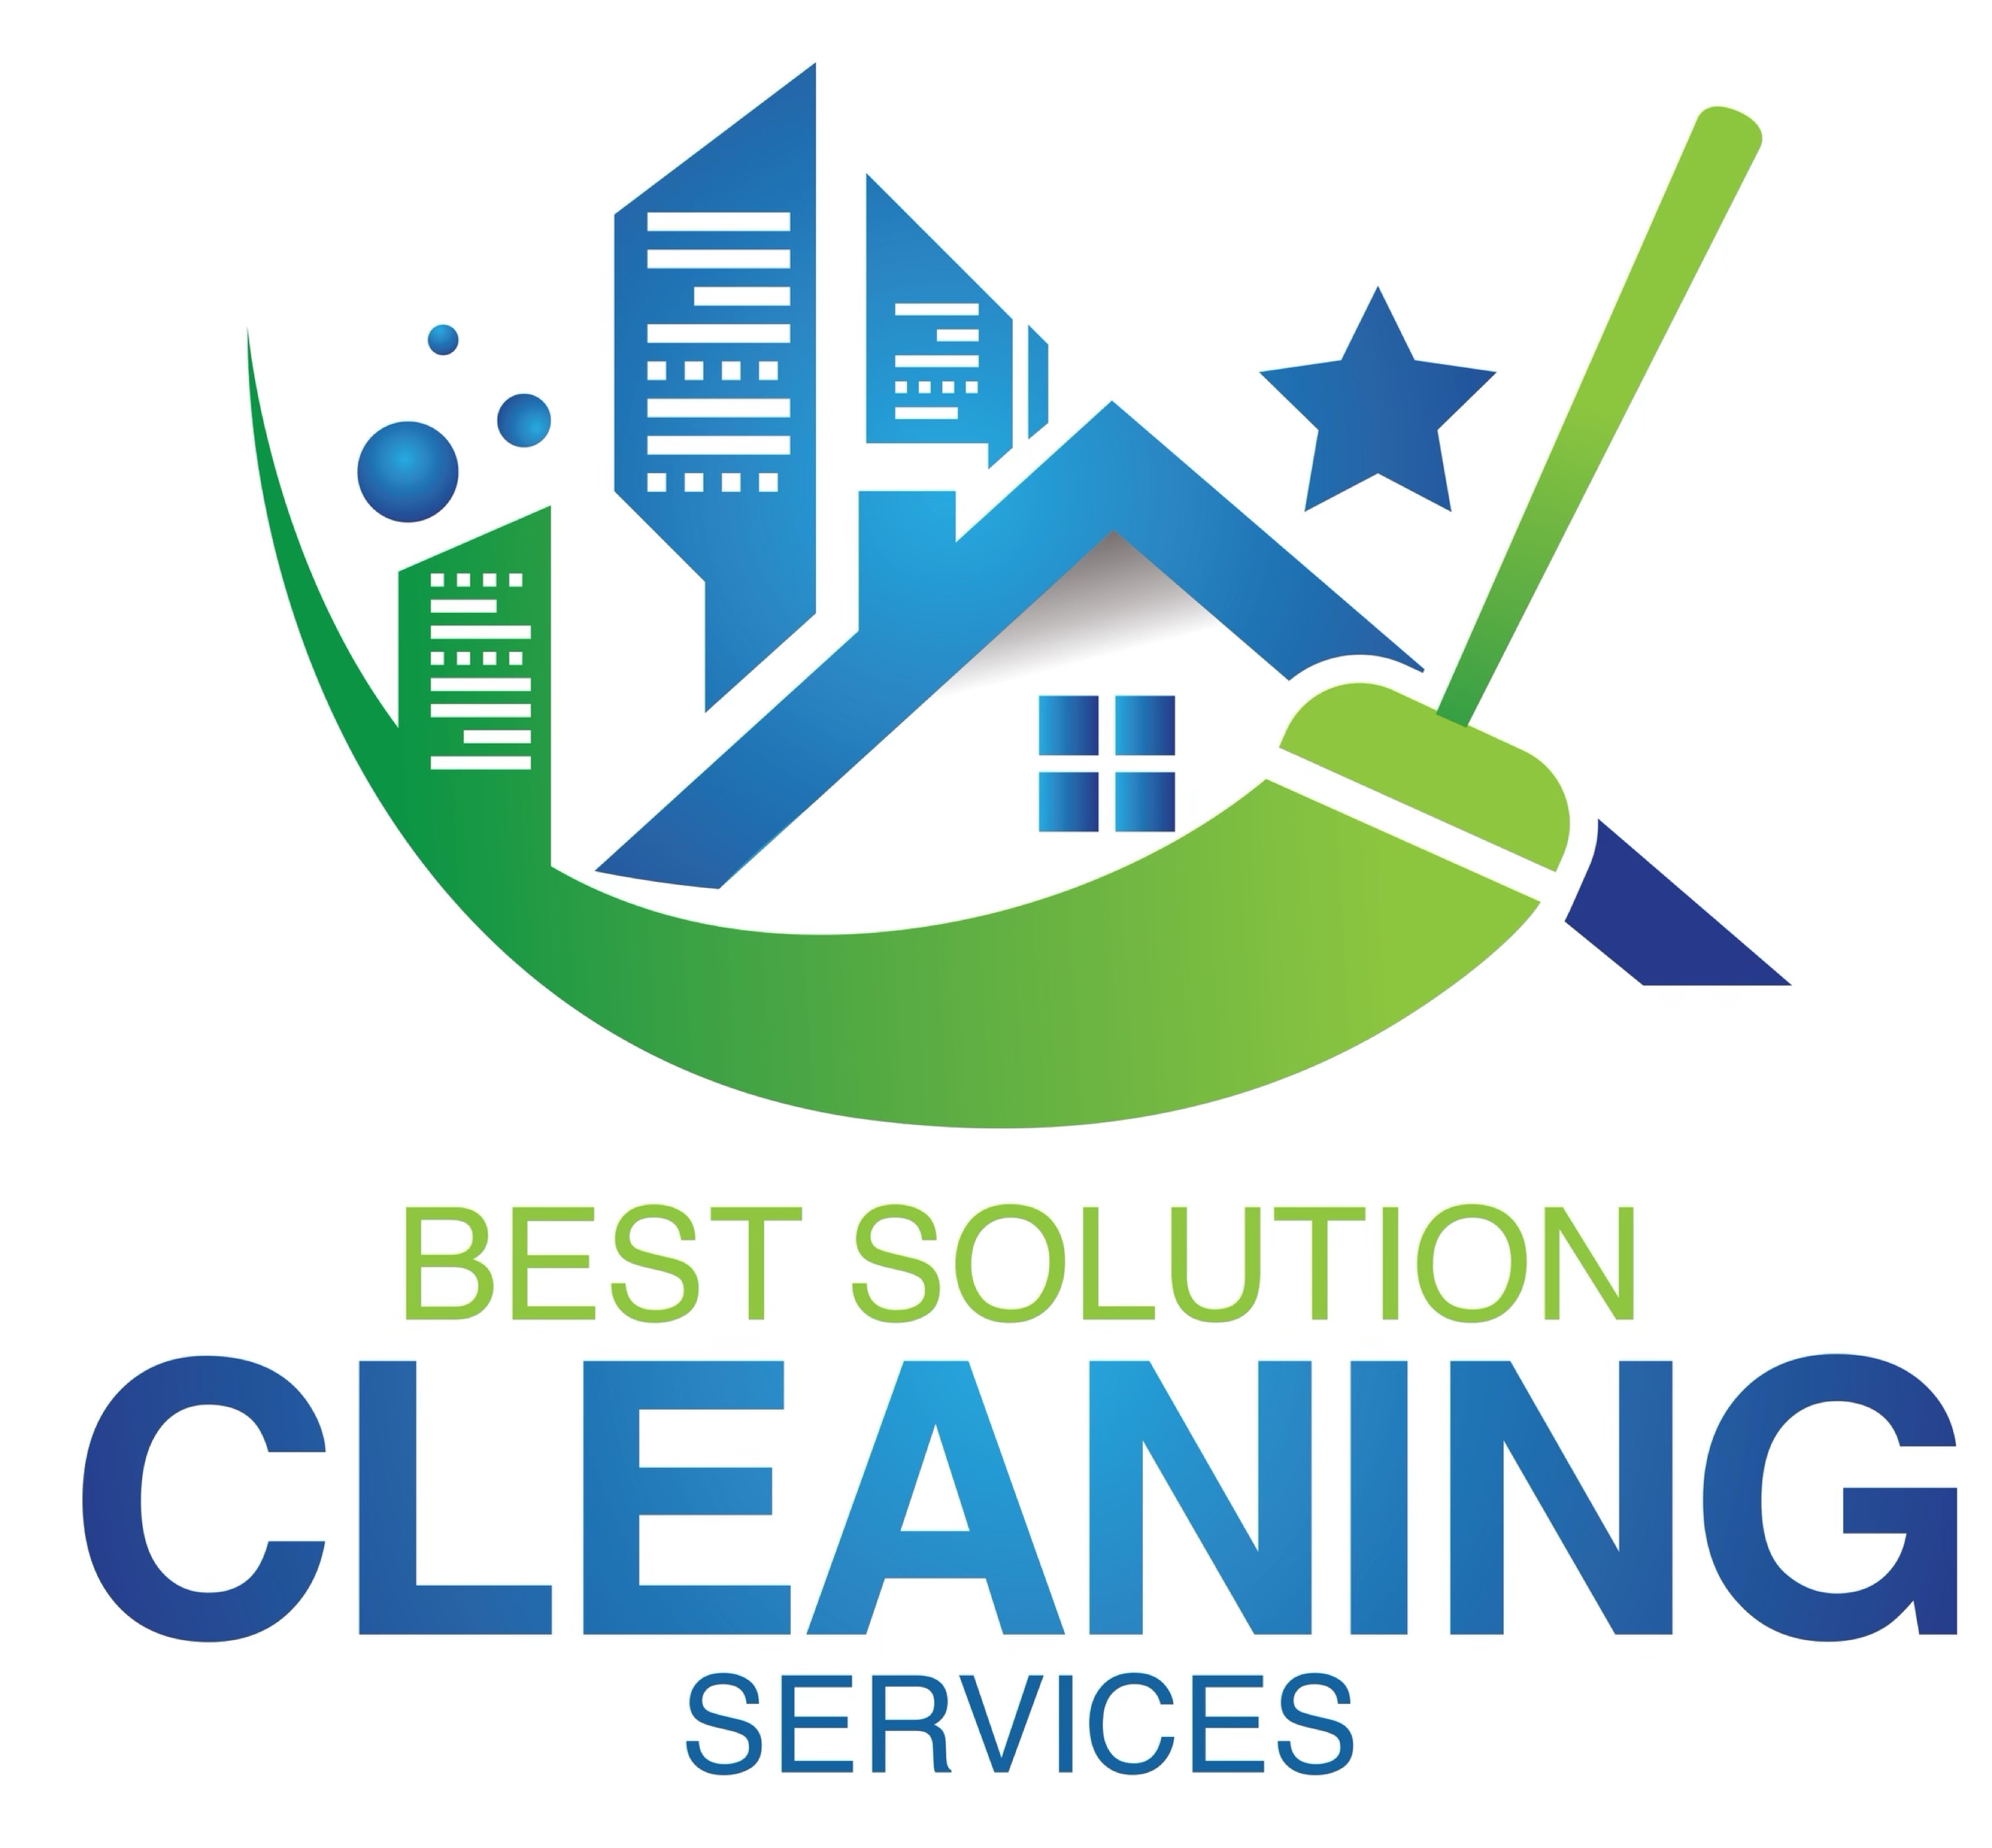 Best Solution Cleaning Services Logo